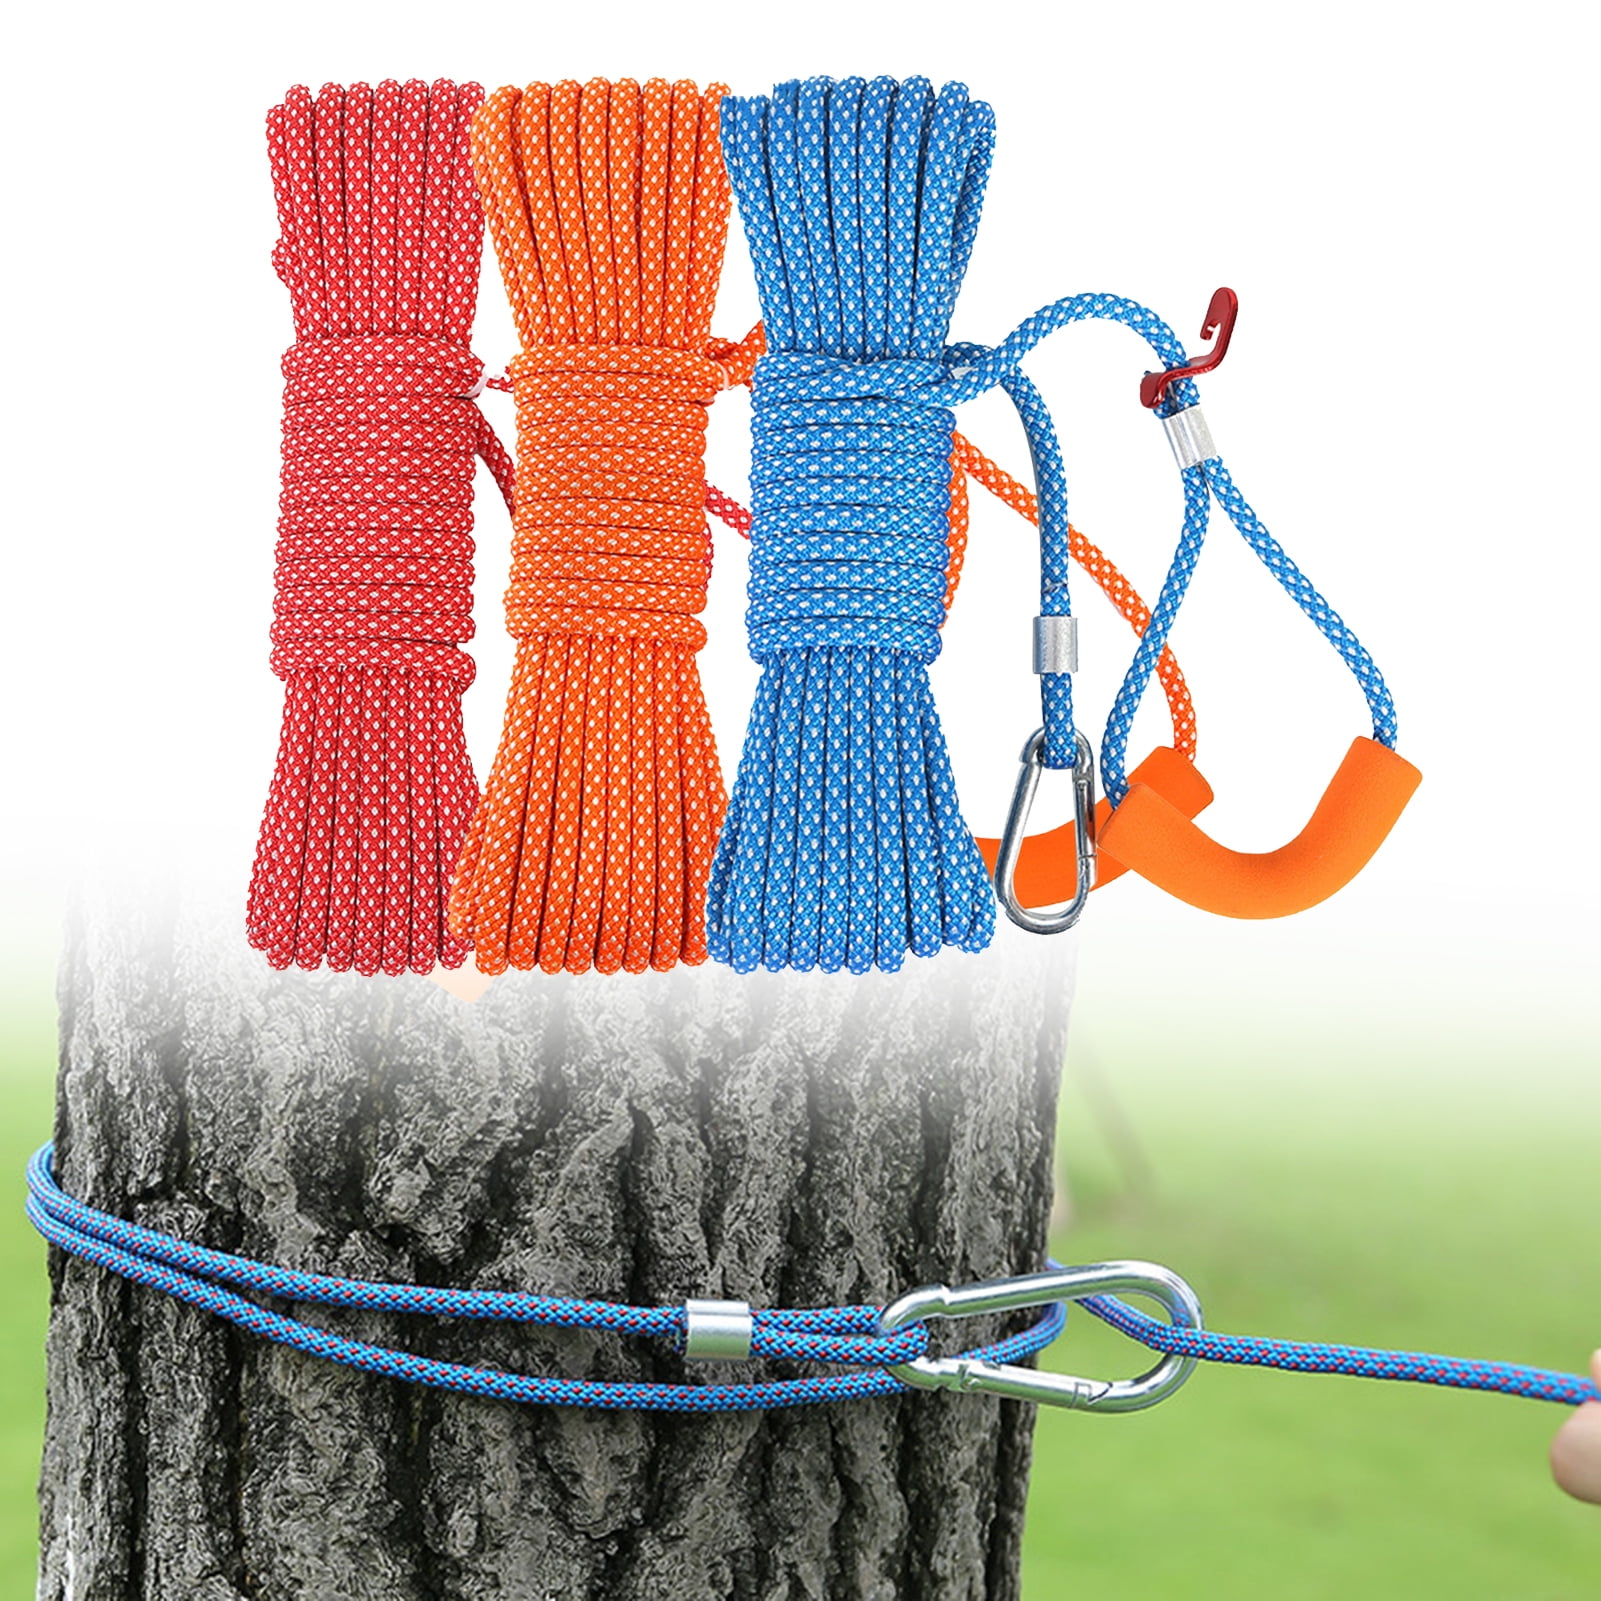 Adjustable Clothes Line Rope Clothes Drying Rope Laundry Clothesline Windproof Clothes Line Hanger Indoor 2 Pack Portable Travel Clothesline Camping Outdoor